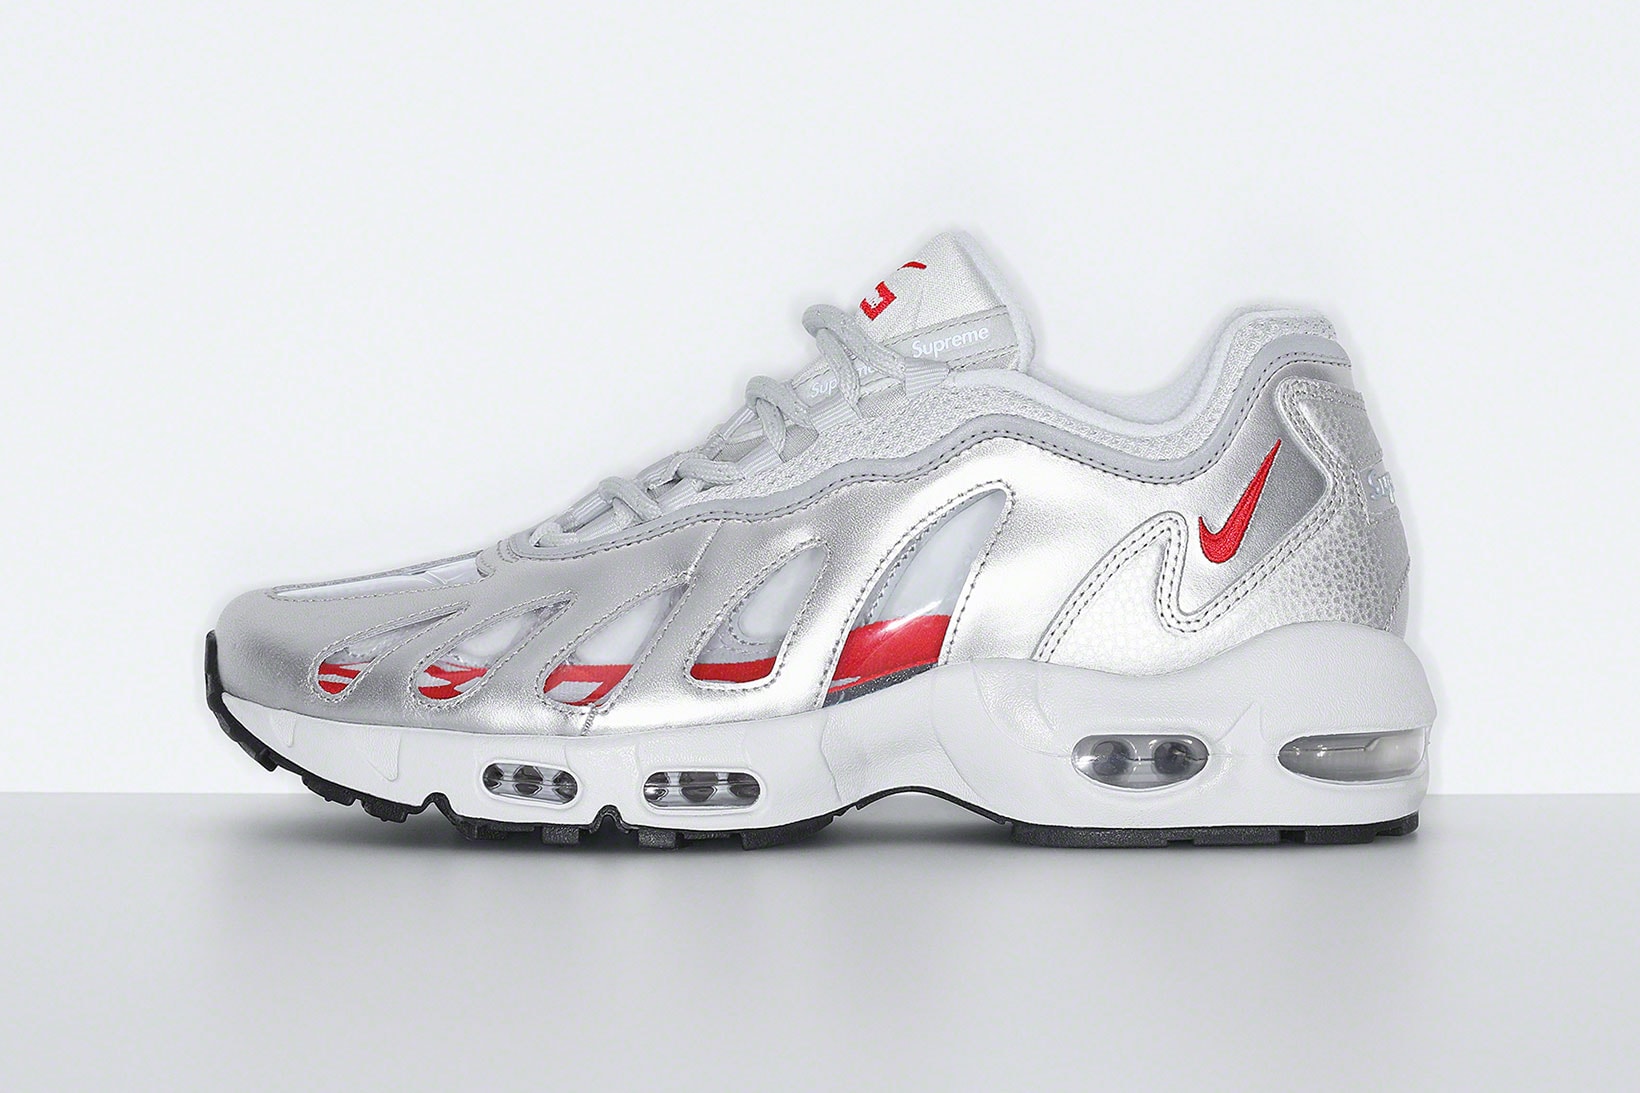 supreme nike air max am96 sneakers collaboration silver white transparent laterals